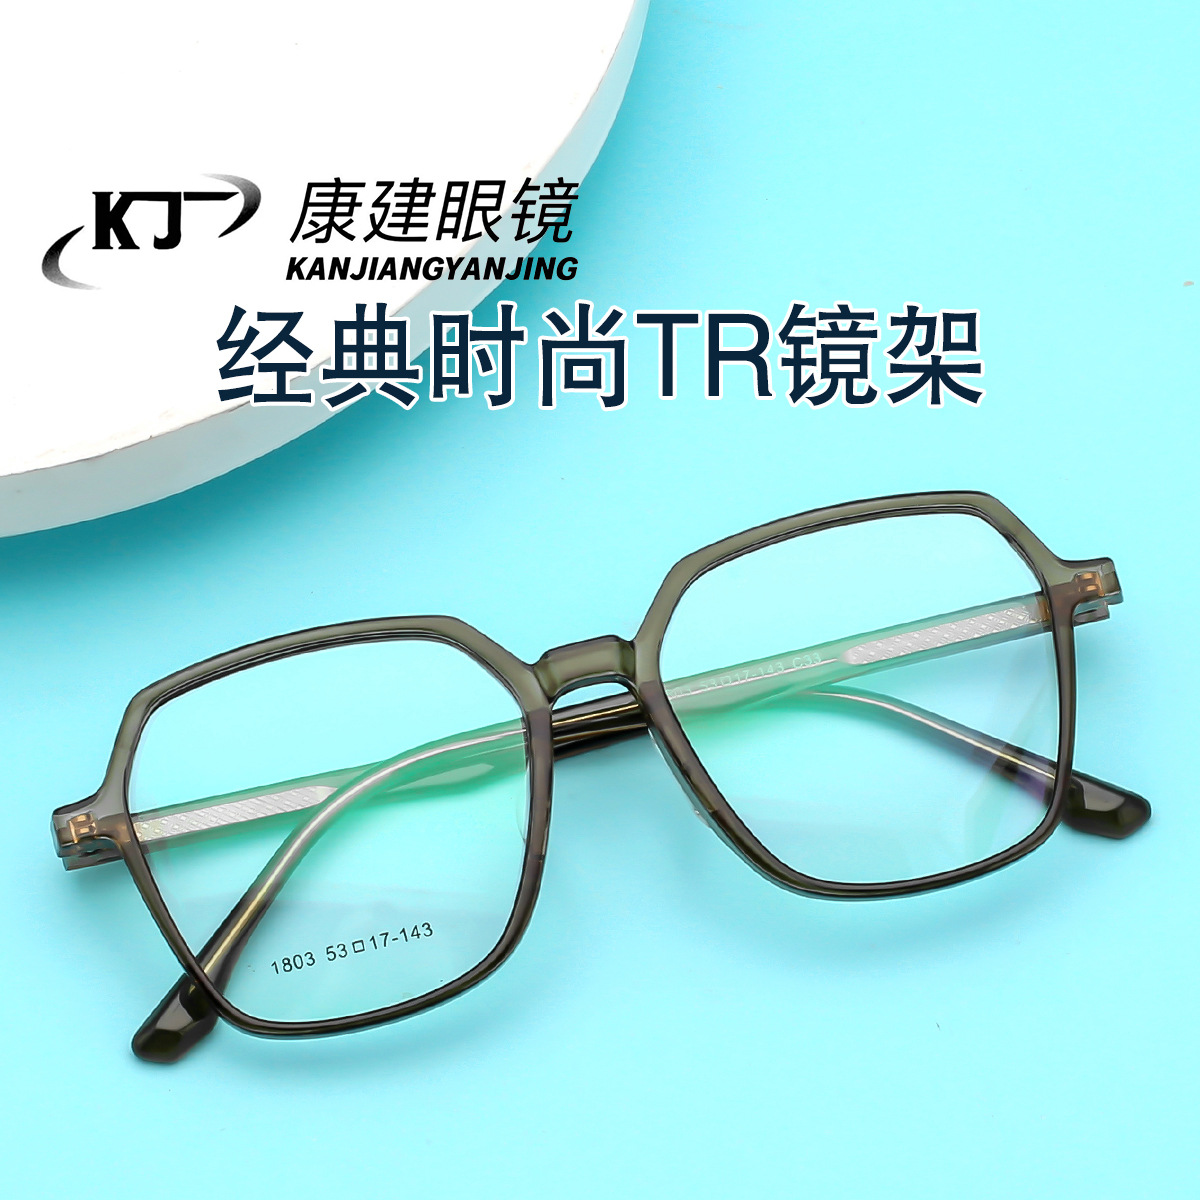 Danyang goods in stock transparent Polygon Red Eye Frame Retro Ultralight TR90 student myopia Spectacle frame wholesale